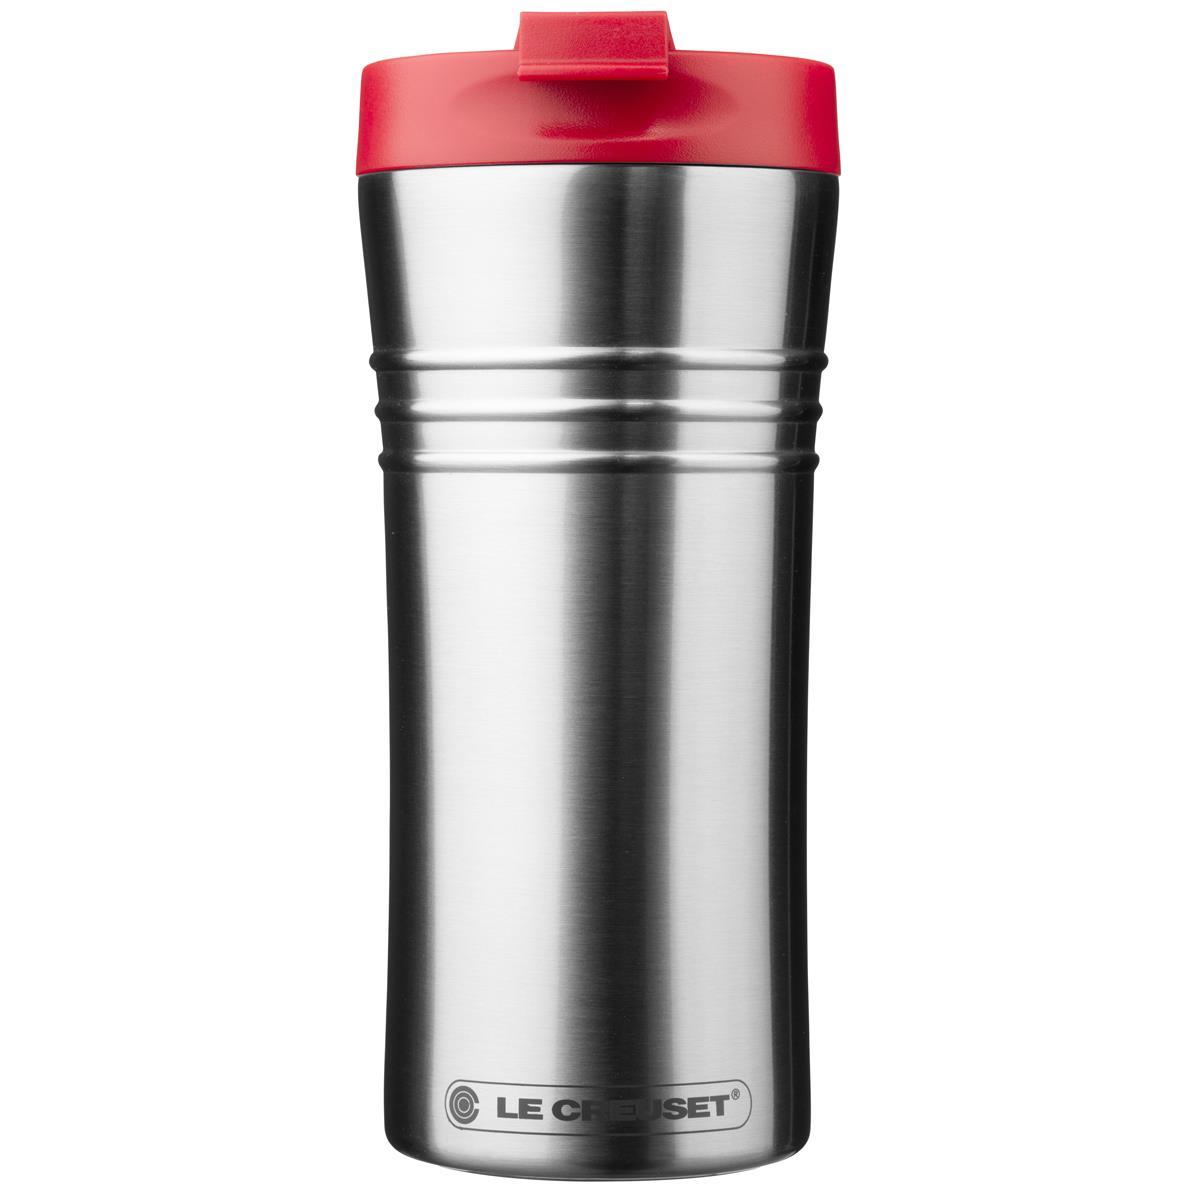 What is the purpose of vacuum sealing in the Le Creuset travel mug?